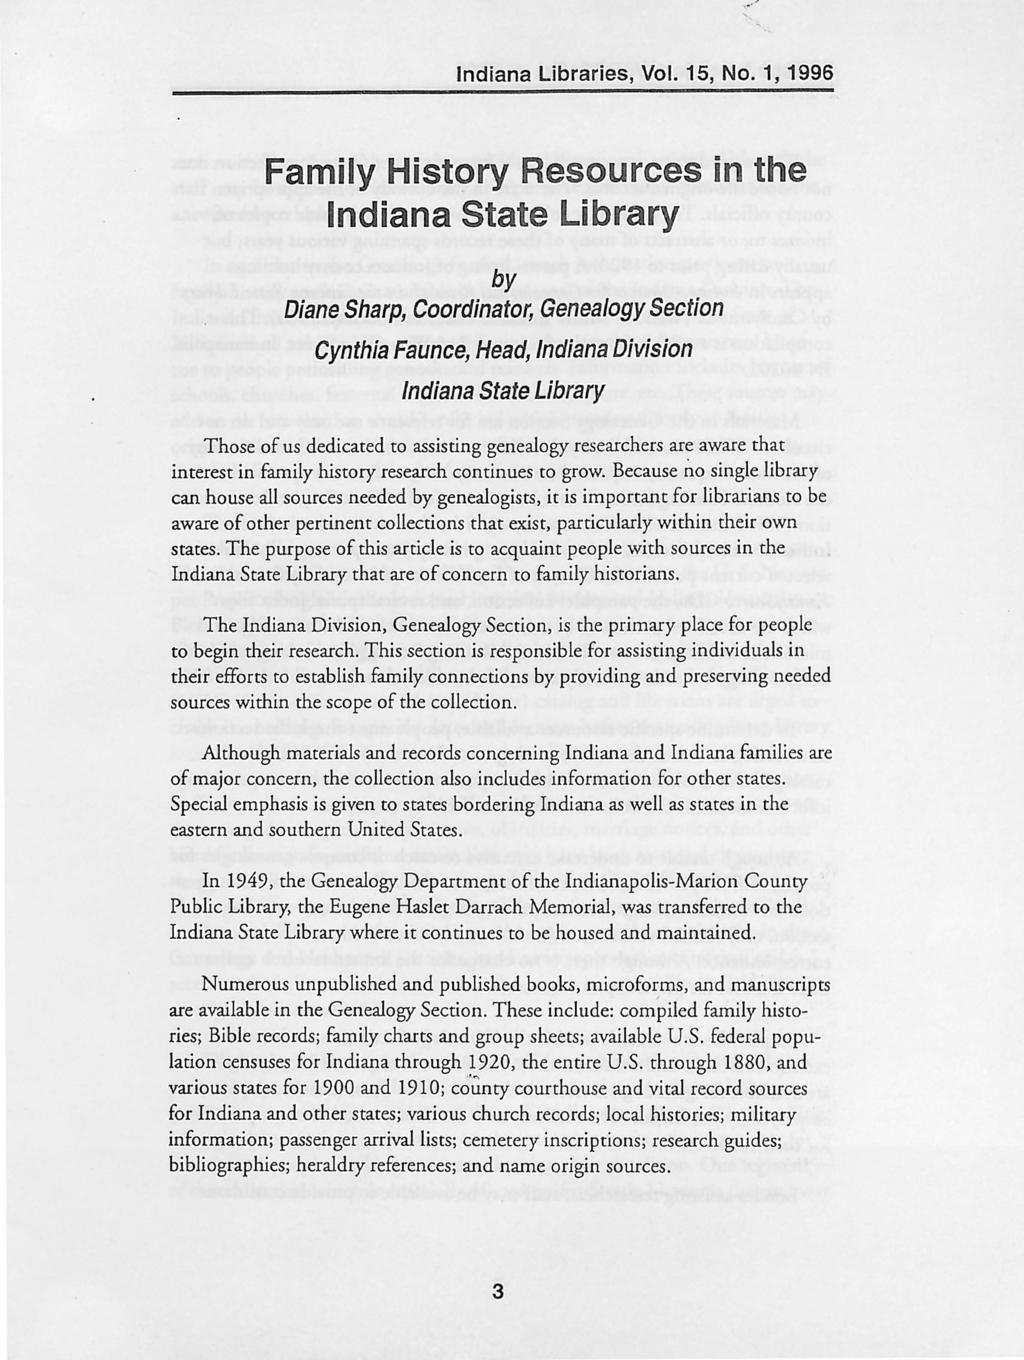 Family History Resources in the Indiana State Library by Diane Sharp, Coordinator, Genealogy Section Cynthia Faunce, Head, Indiana Division Indiana State Library Those of us dedicated to assisting